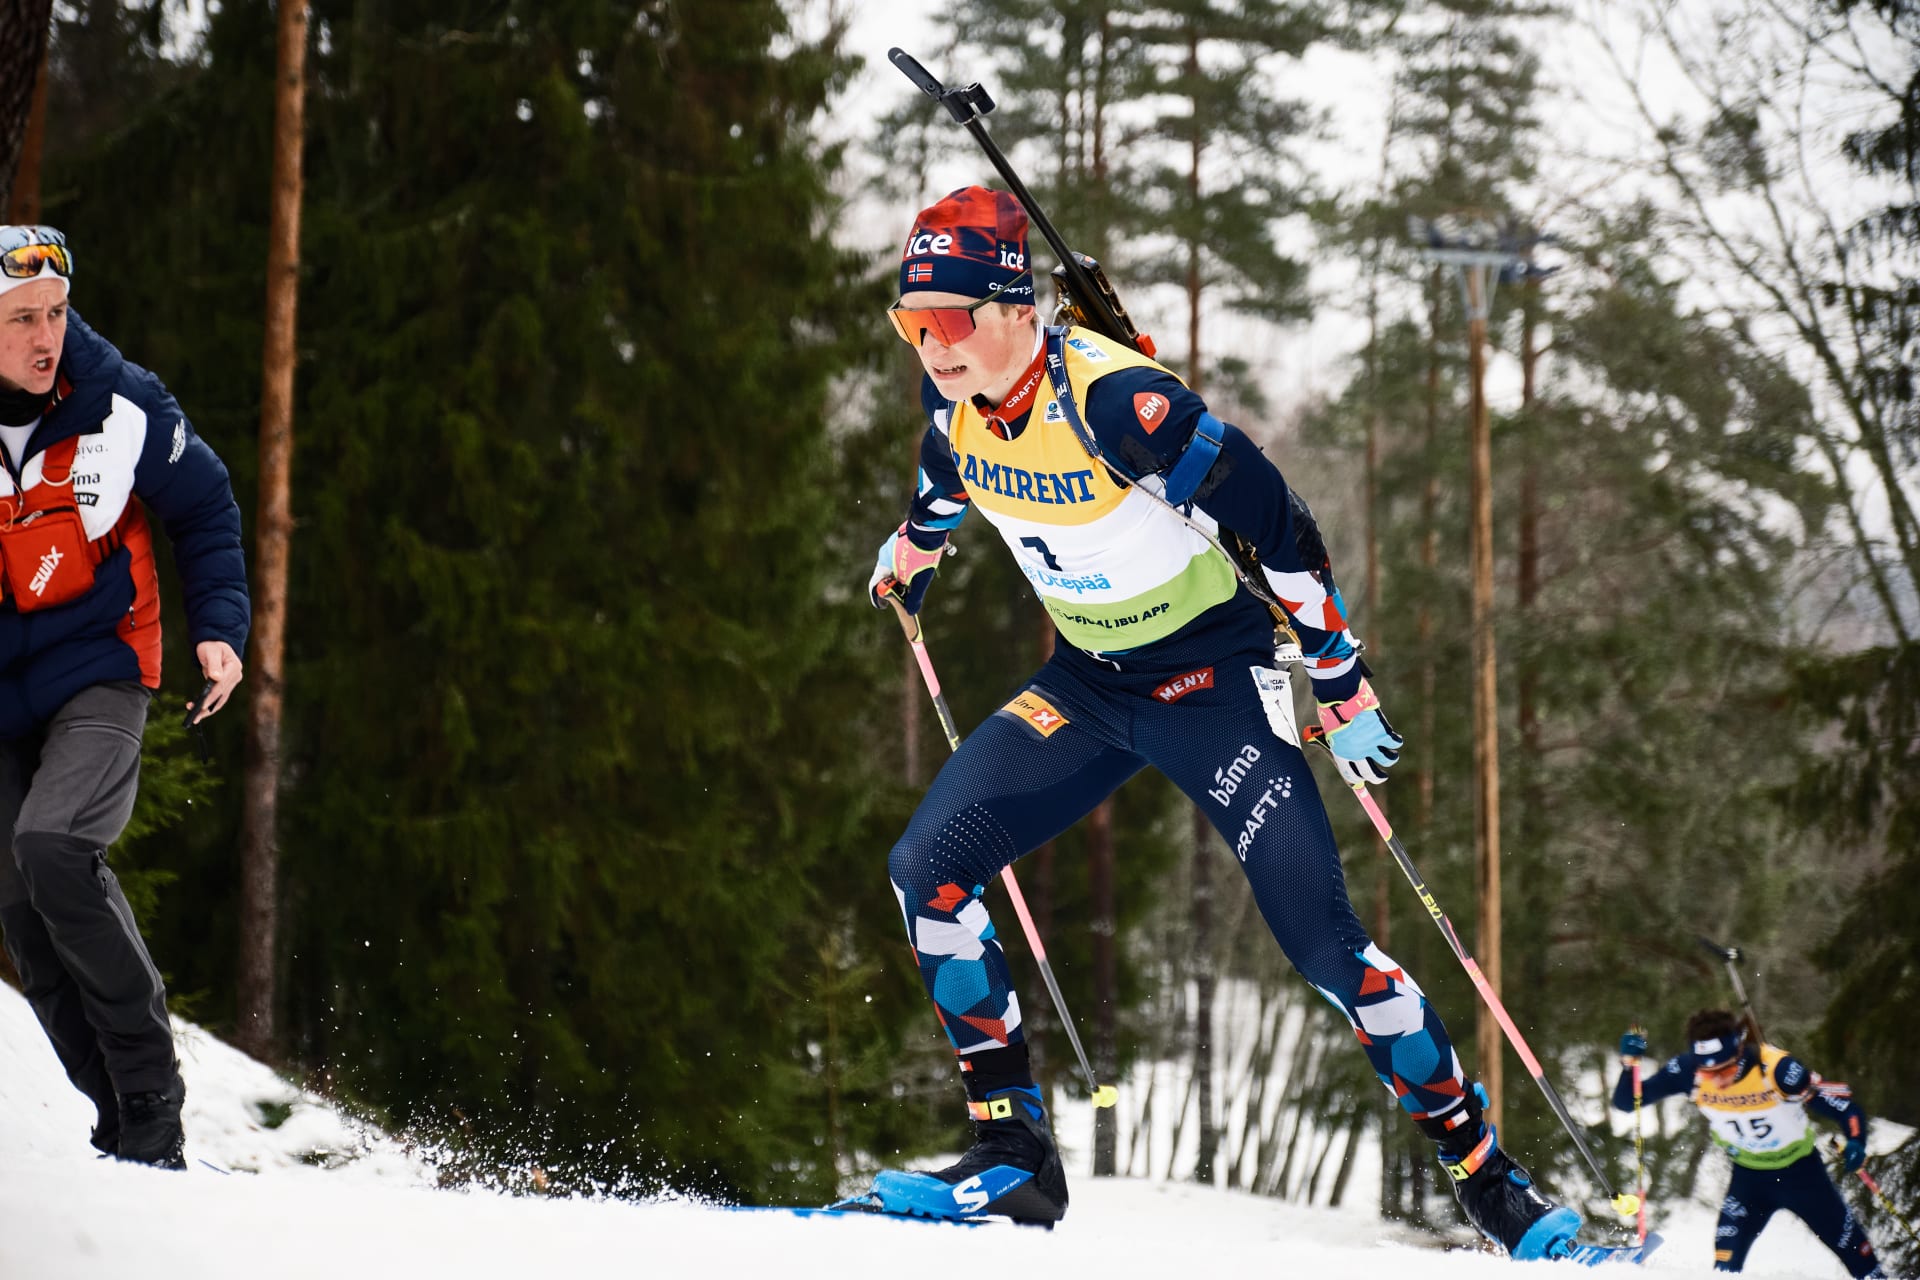 Isak Frey and Sara Andersson work their magic on the track and win the sprint races